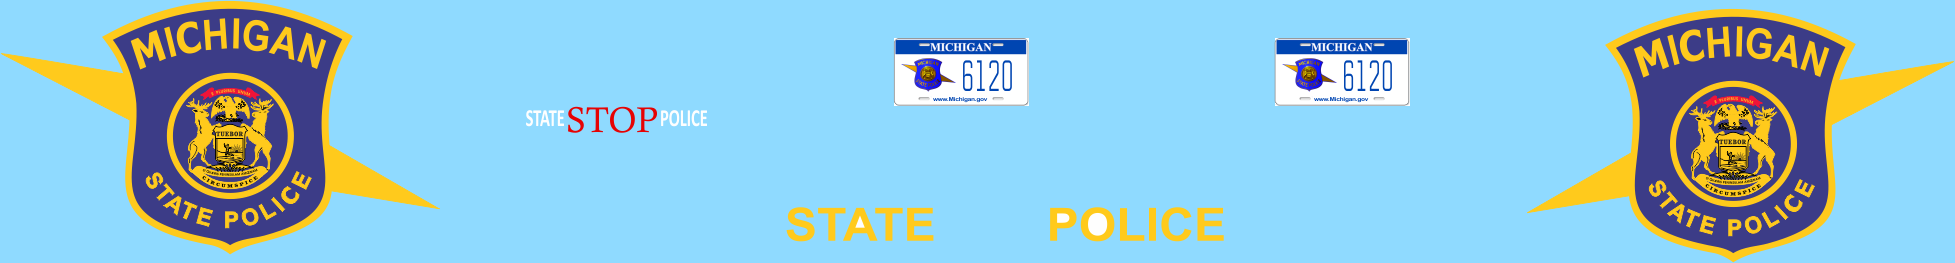 1/24-1/25 Michigan State Police waterslide decals